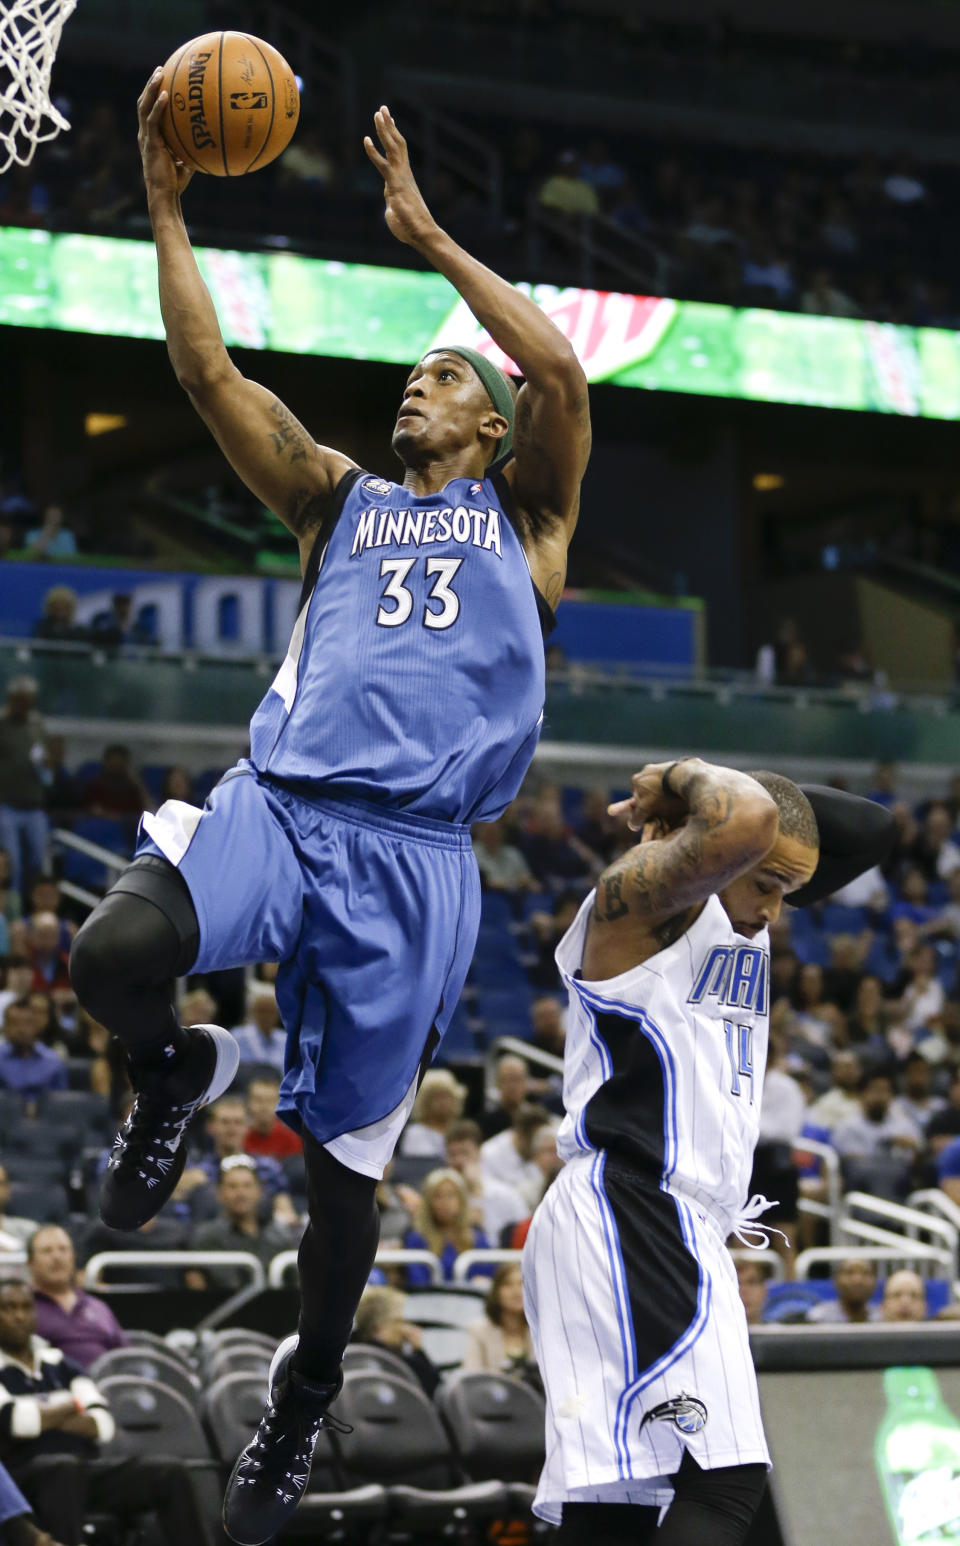 Minnesota Timberwolves' Dante Cunningham (33) gets past Orlando Magic's Jameer Nelson for a basket during the first half of an NBA basketball game in Orlando, Fla., Saturday, April 5, 2014. (AP Photo/John Raoux)